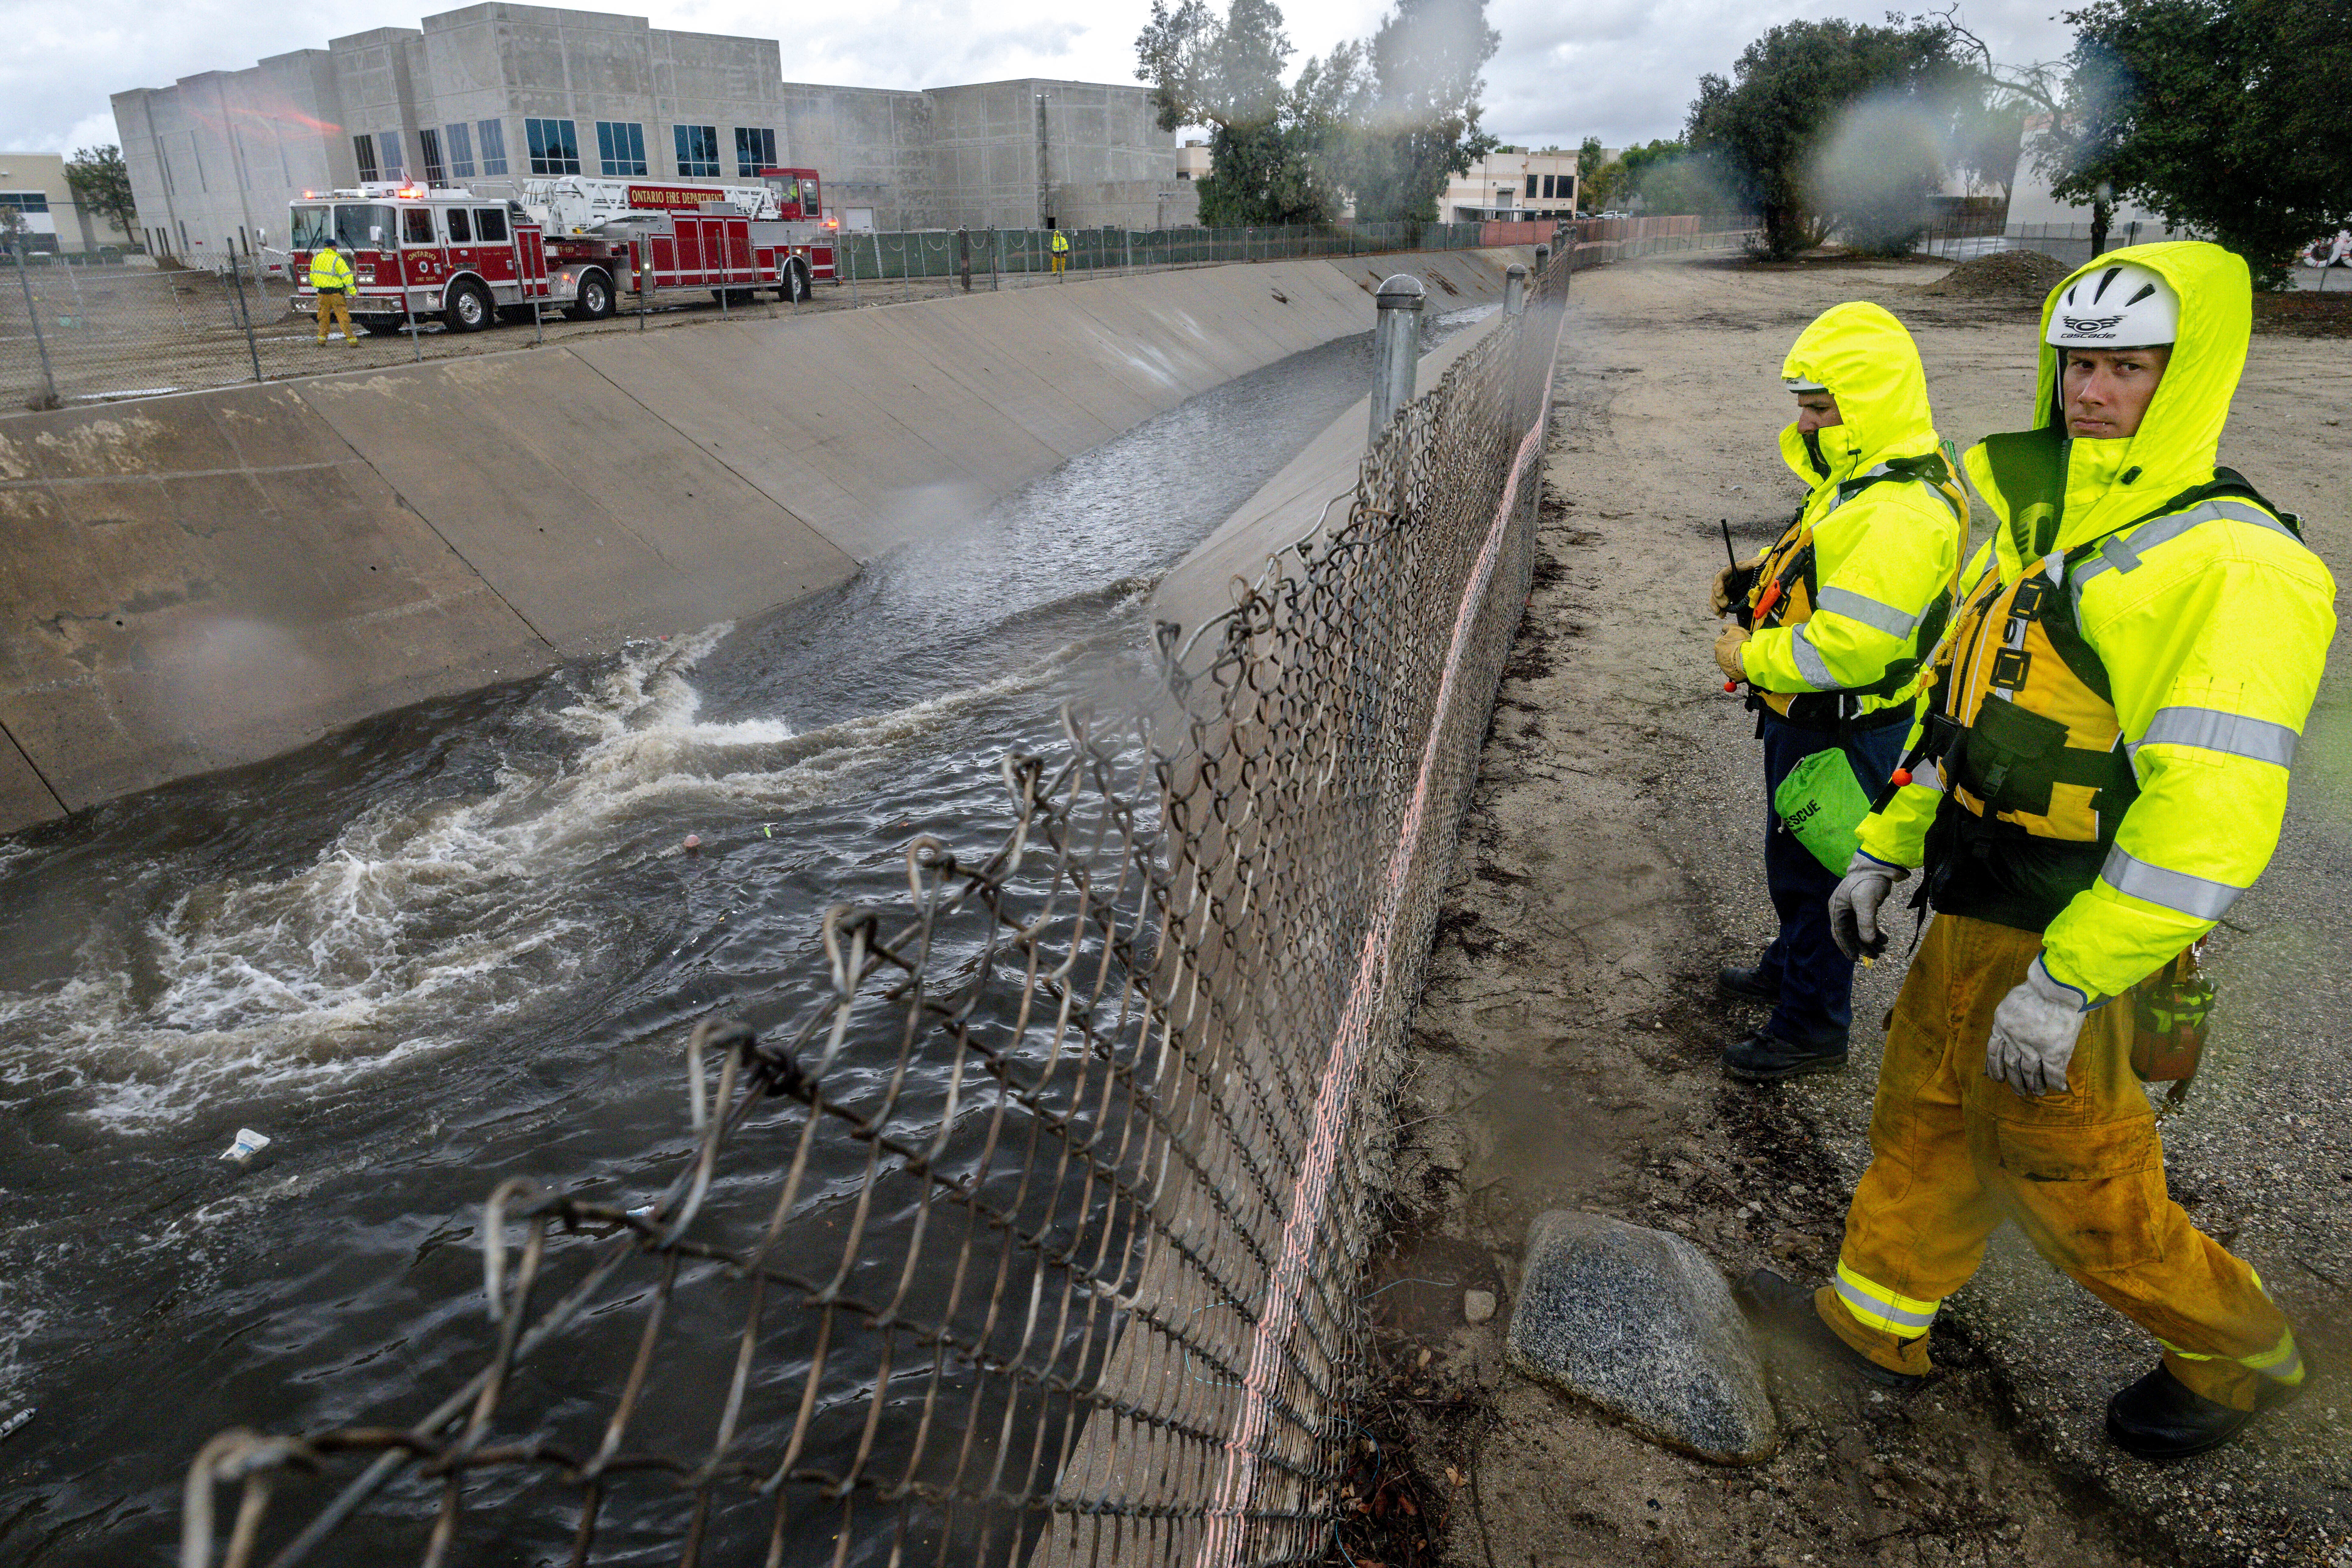 Firefighters look for people trapped in the rain-swollen Cucamonga wash in Ontario